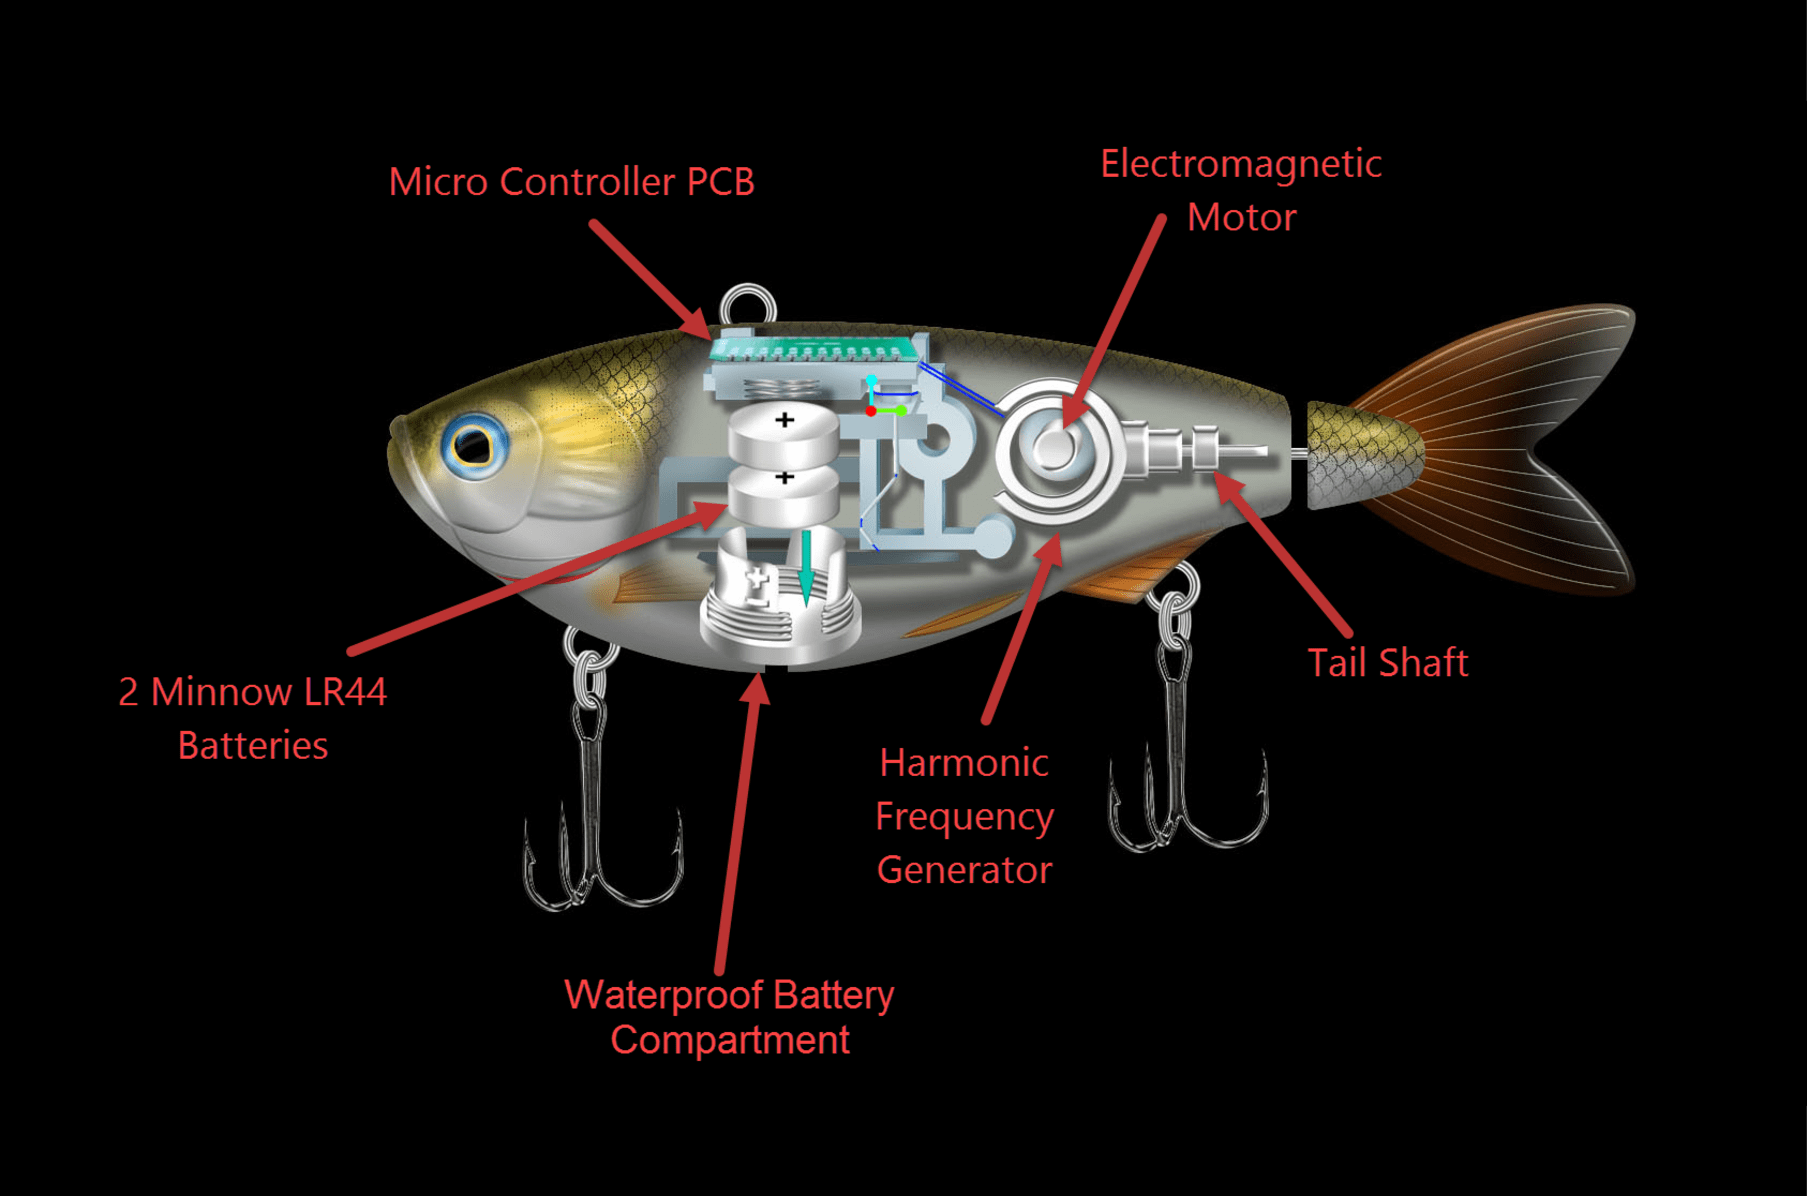 New Fully Motorized Fishing Lure - Beginning of the End for Live